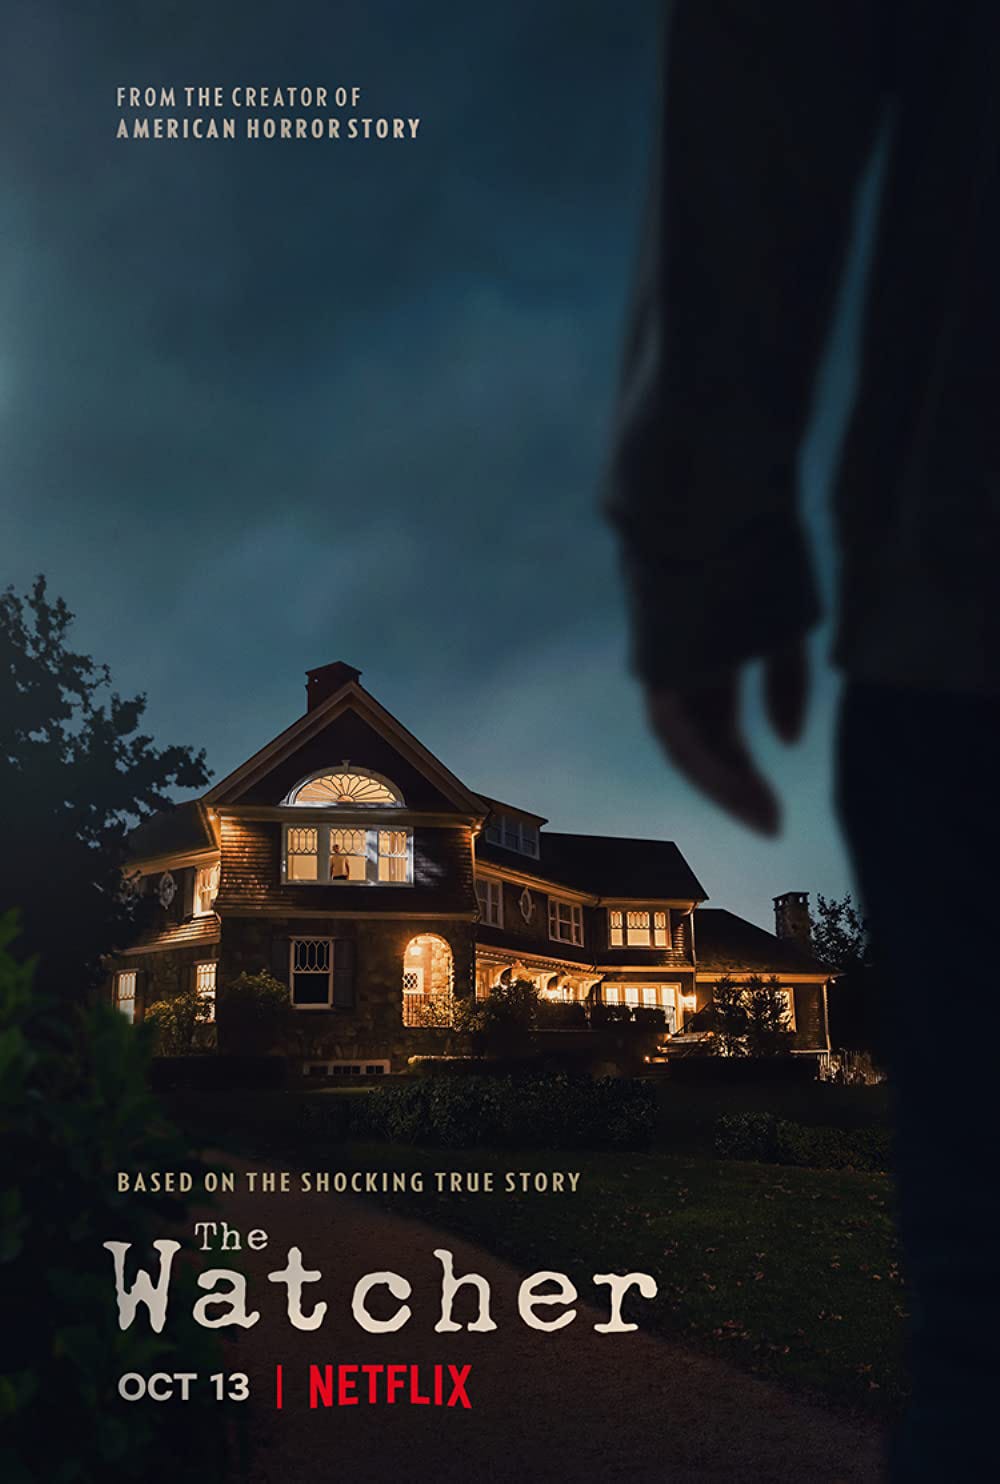 A photo of a (haunted?) house in the background with an ominous hand in the foreground. Text reads, “From the creator of American Horror Story, Based on the Shocking True Story, The Watcher | Oct 13 Netflix”